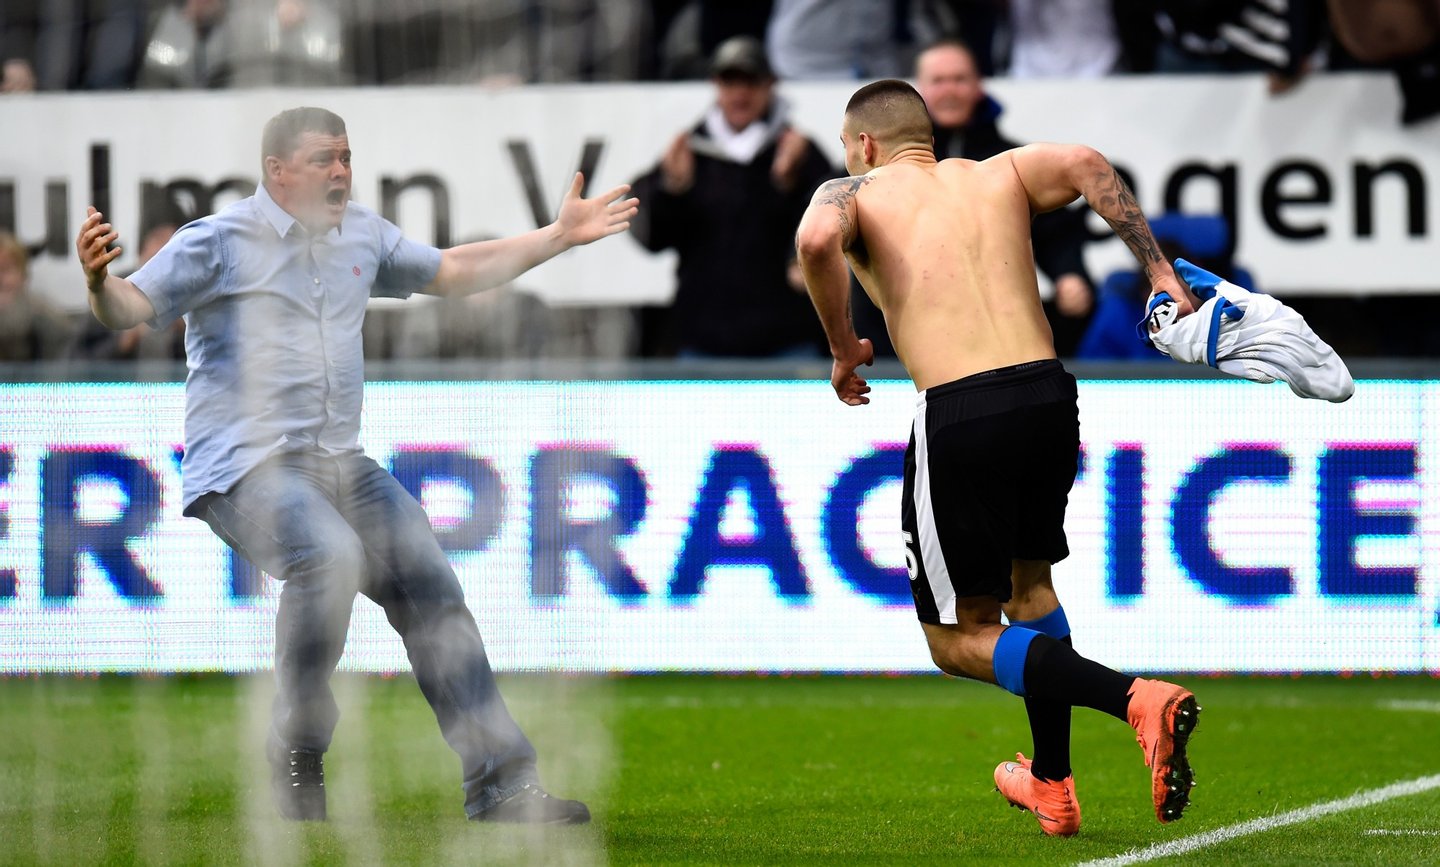 NEWCASTLE UPON TYNE, ENGLAND - MARCH 20: Aleksandar Mitrovic of Newcastle United ceebrates with a fan as he celebrates scoring their first and equalising goal during the Barclays Premier League match between Newcastle United and Sunderland at St James' Park on March 20, 2016 in Newcastle upon Tyne, United Kingdom. (Photo by Stu Forster/Getty Images)